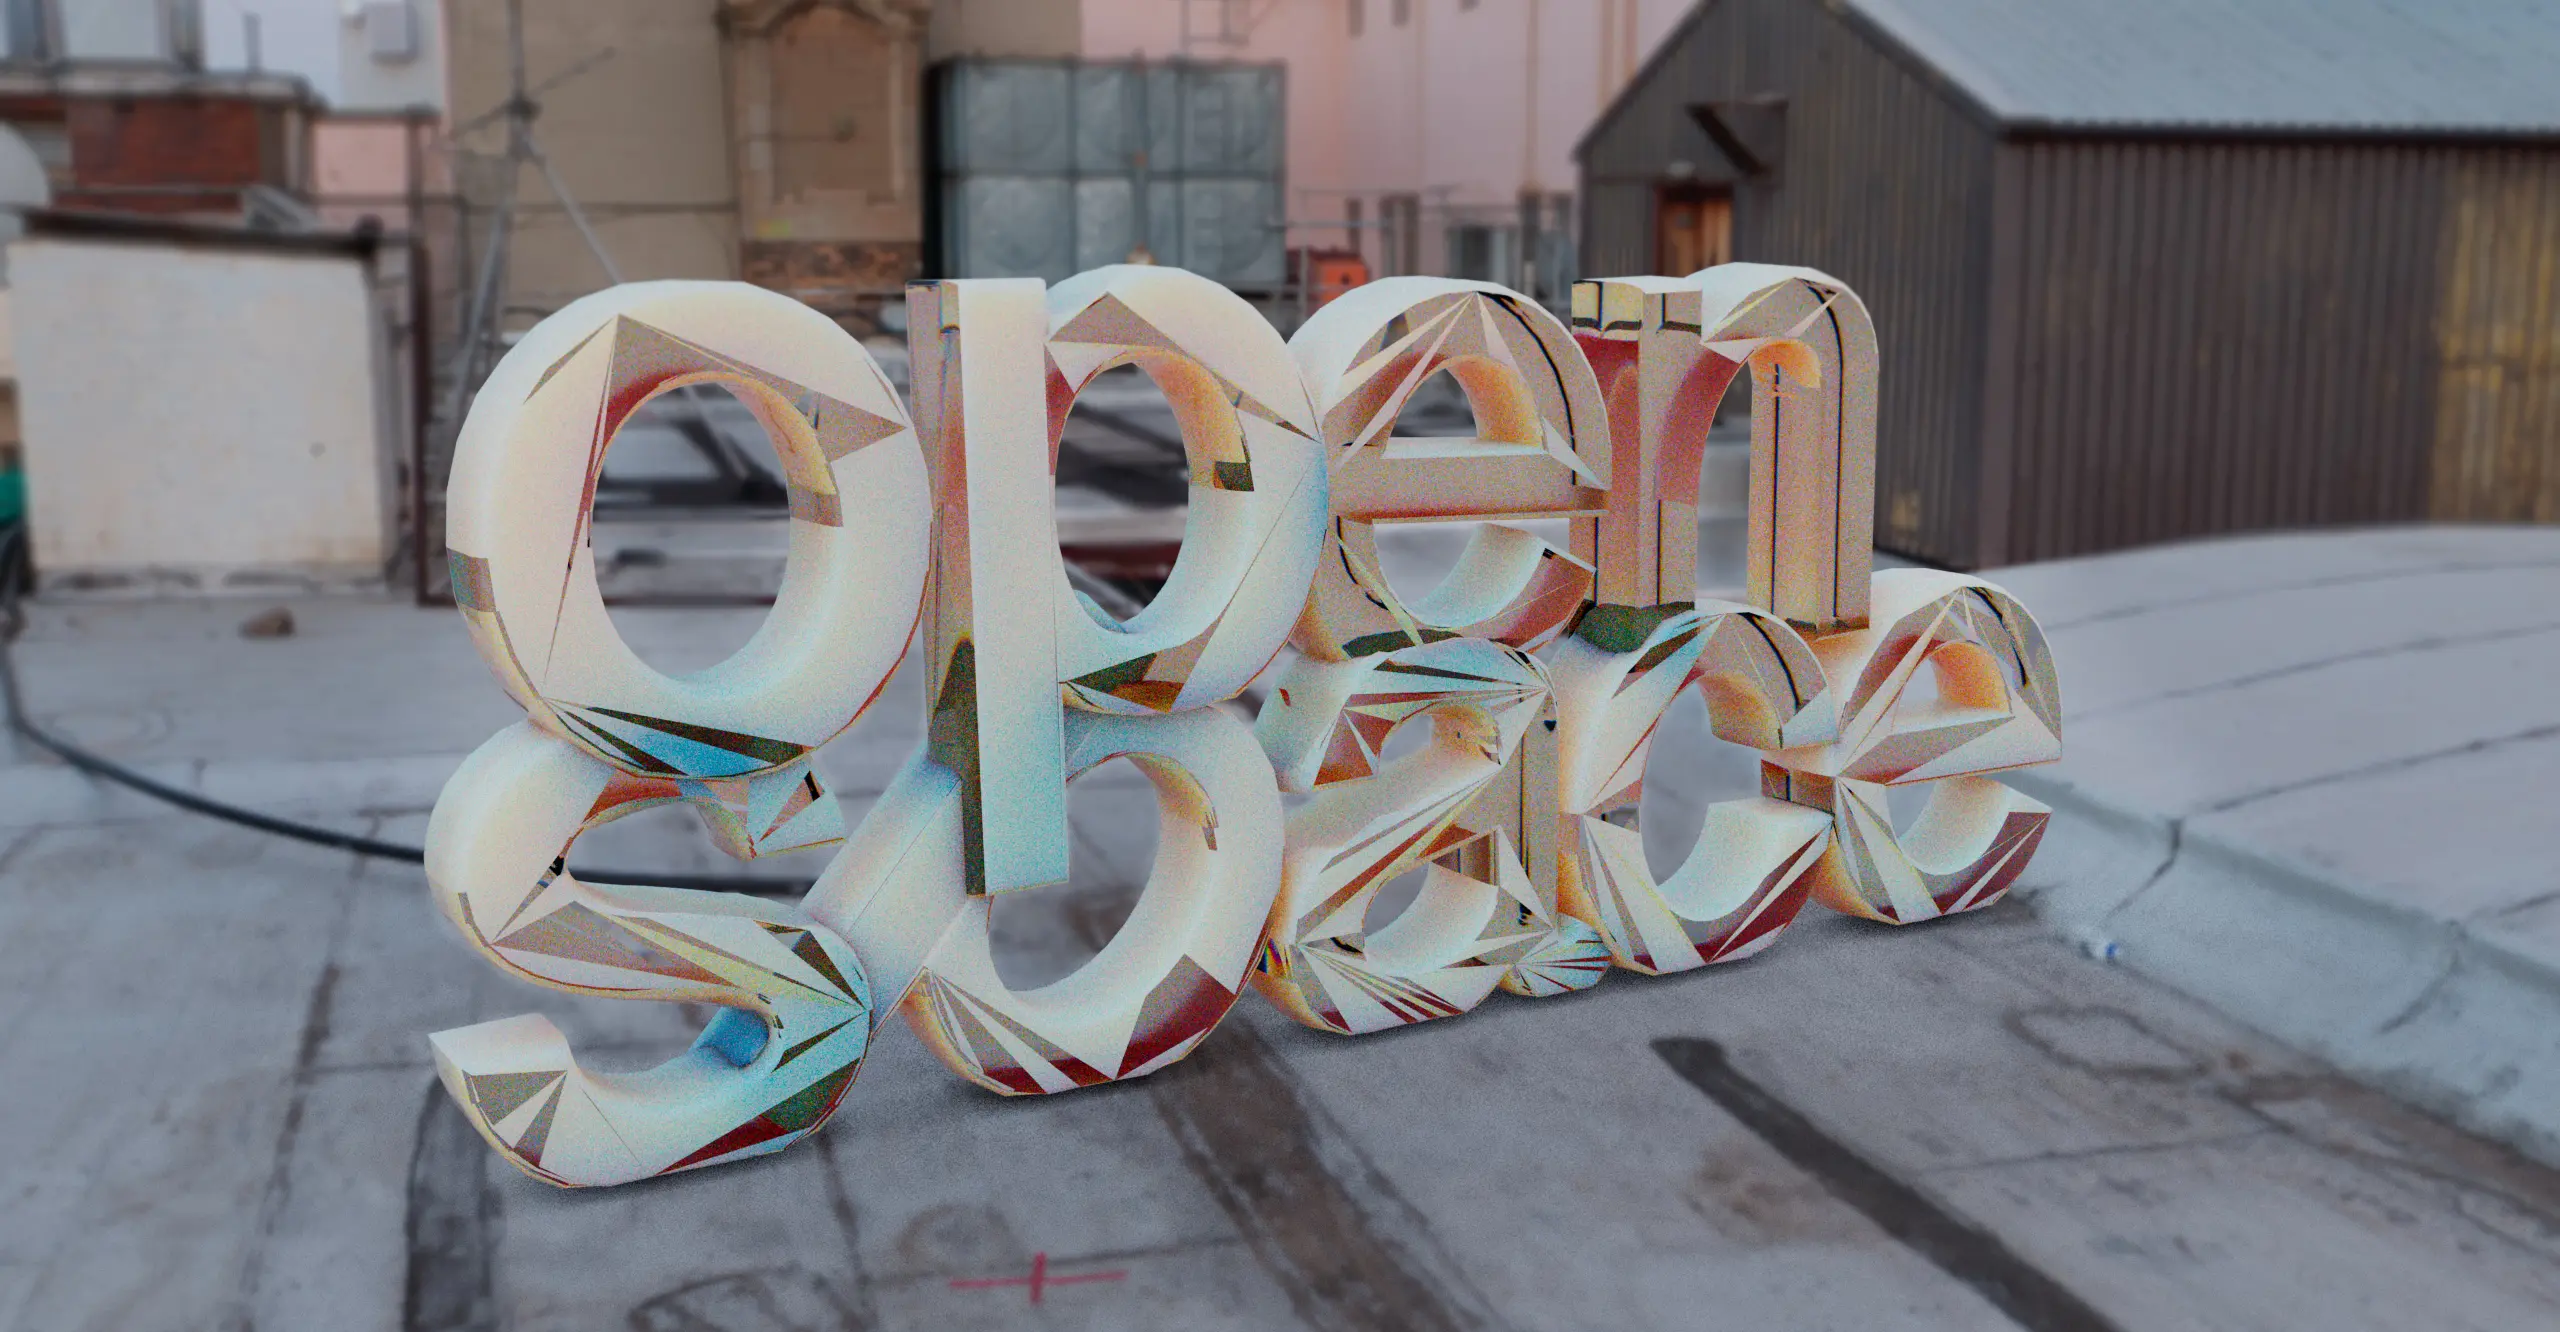 3D text that reads 'Open Space' sits on a rooftop